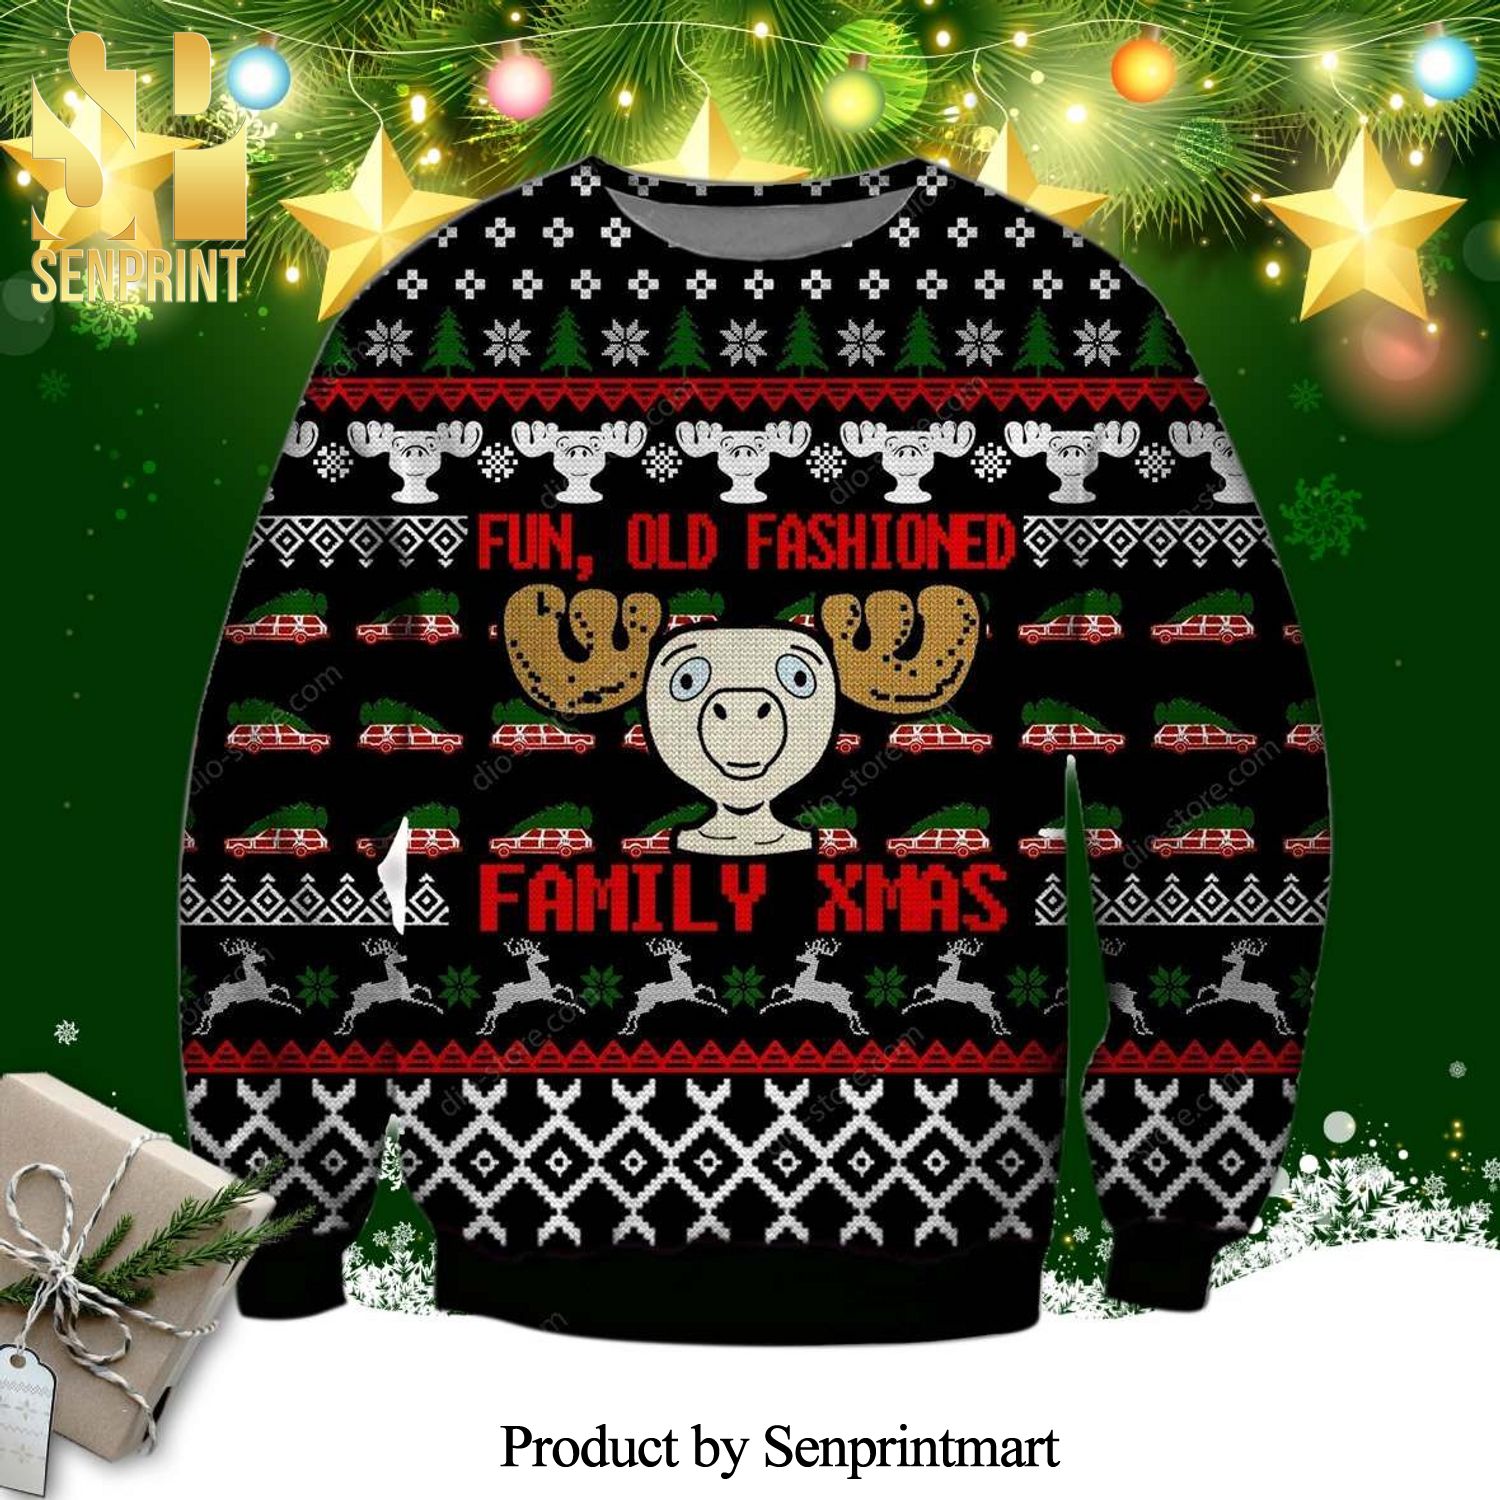 Fun Old Fashioned Family Xmas Knitted Ugly Christmas Sweater